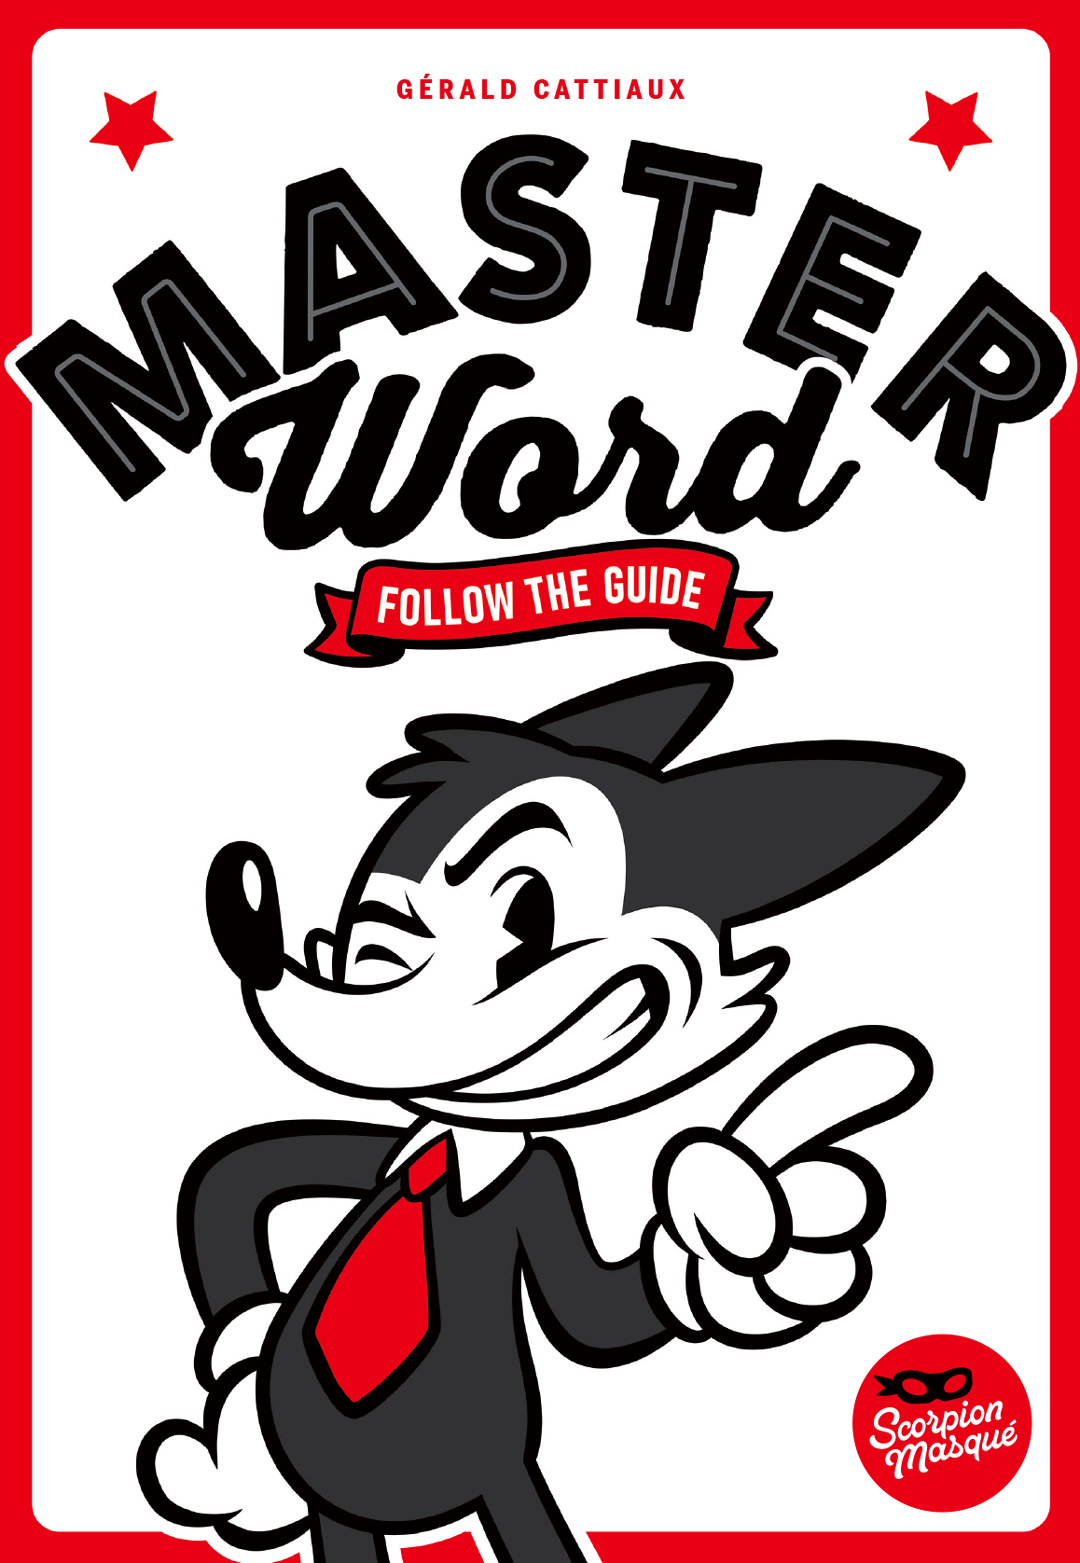 Master Word: Follow the Guide